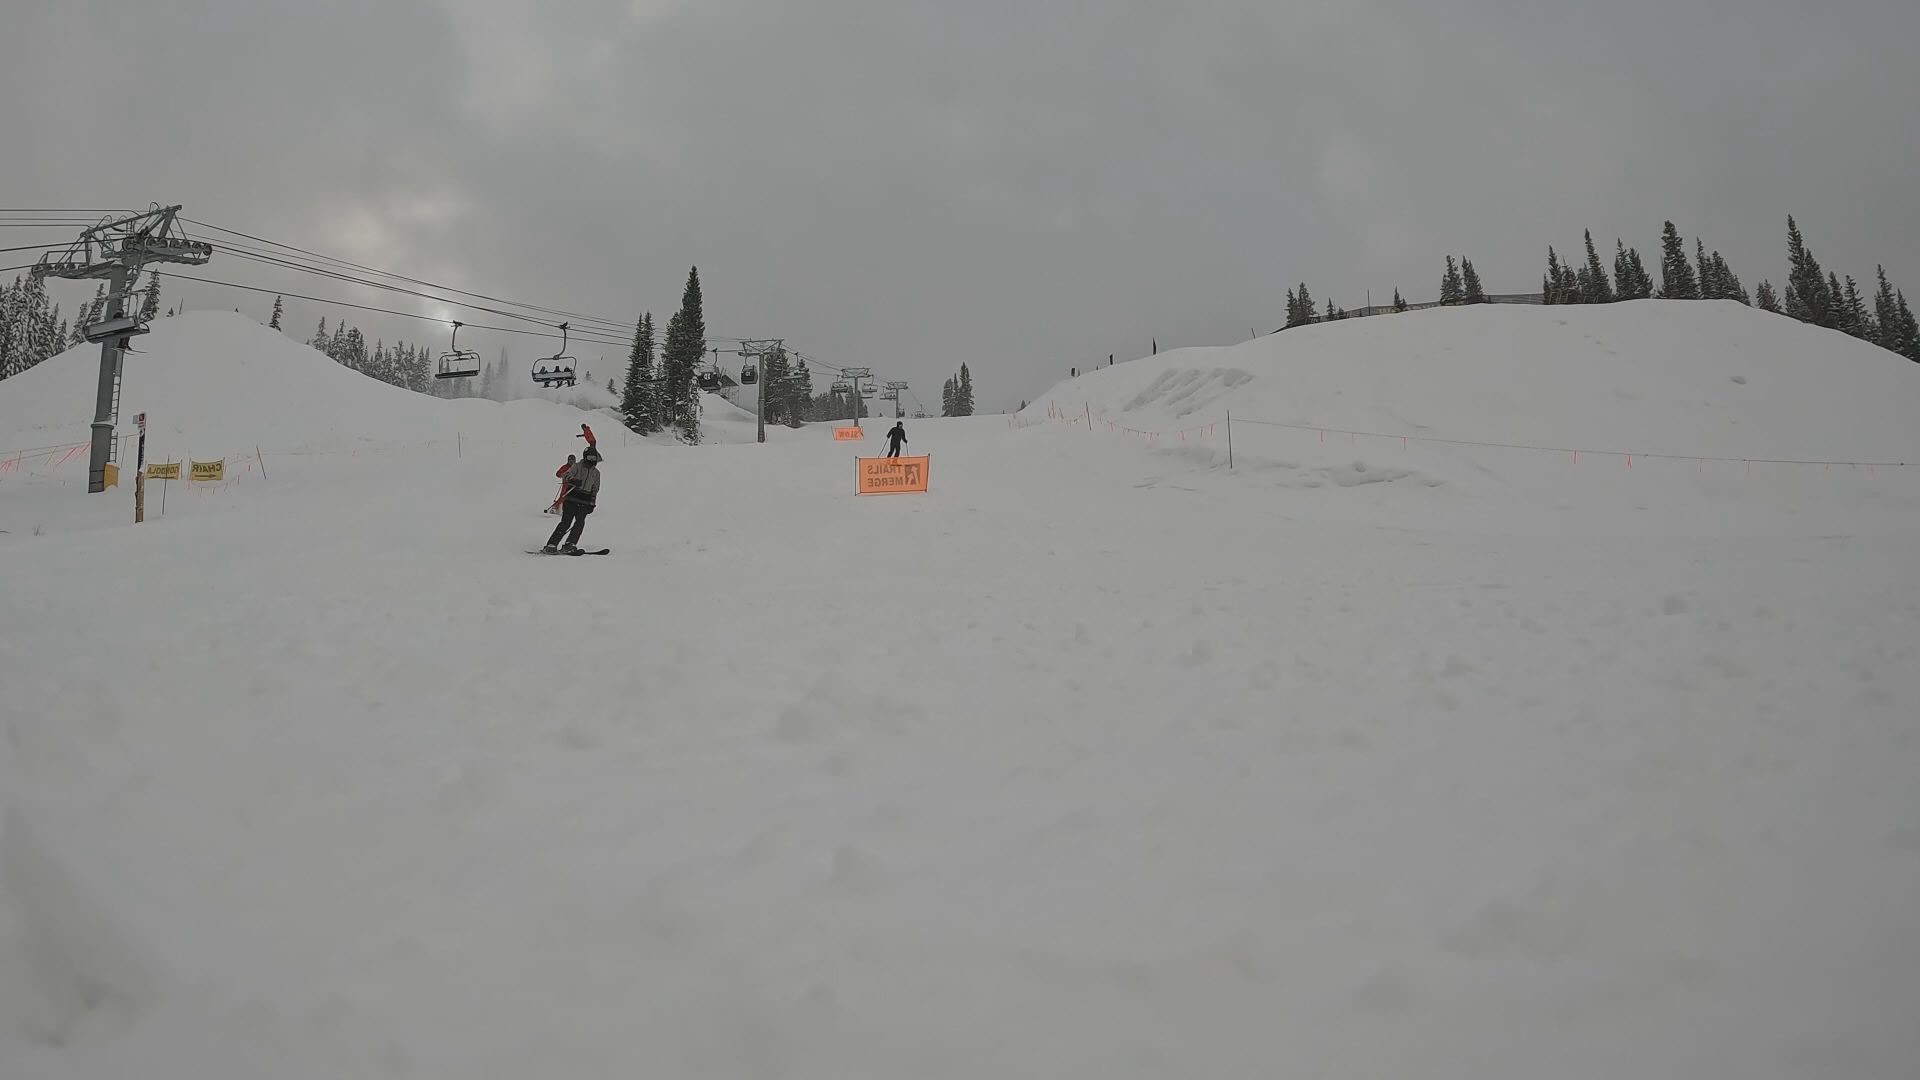 The Summit County Sheriff's Office is investigating a sledding accident Sunday at Copper Mountain Ski Resort that resulted in the deaths of two teens.